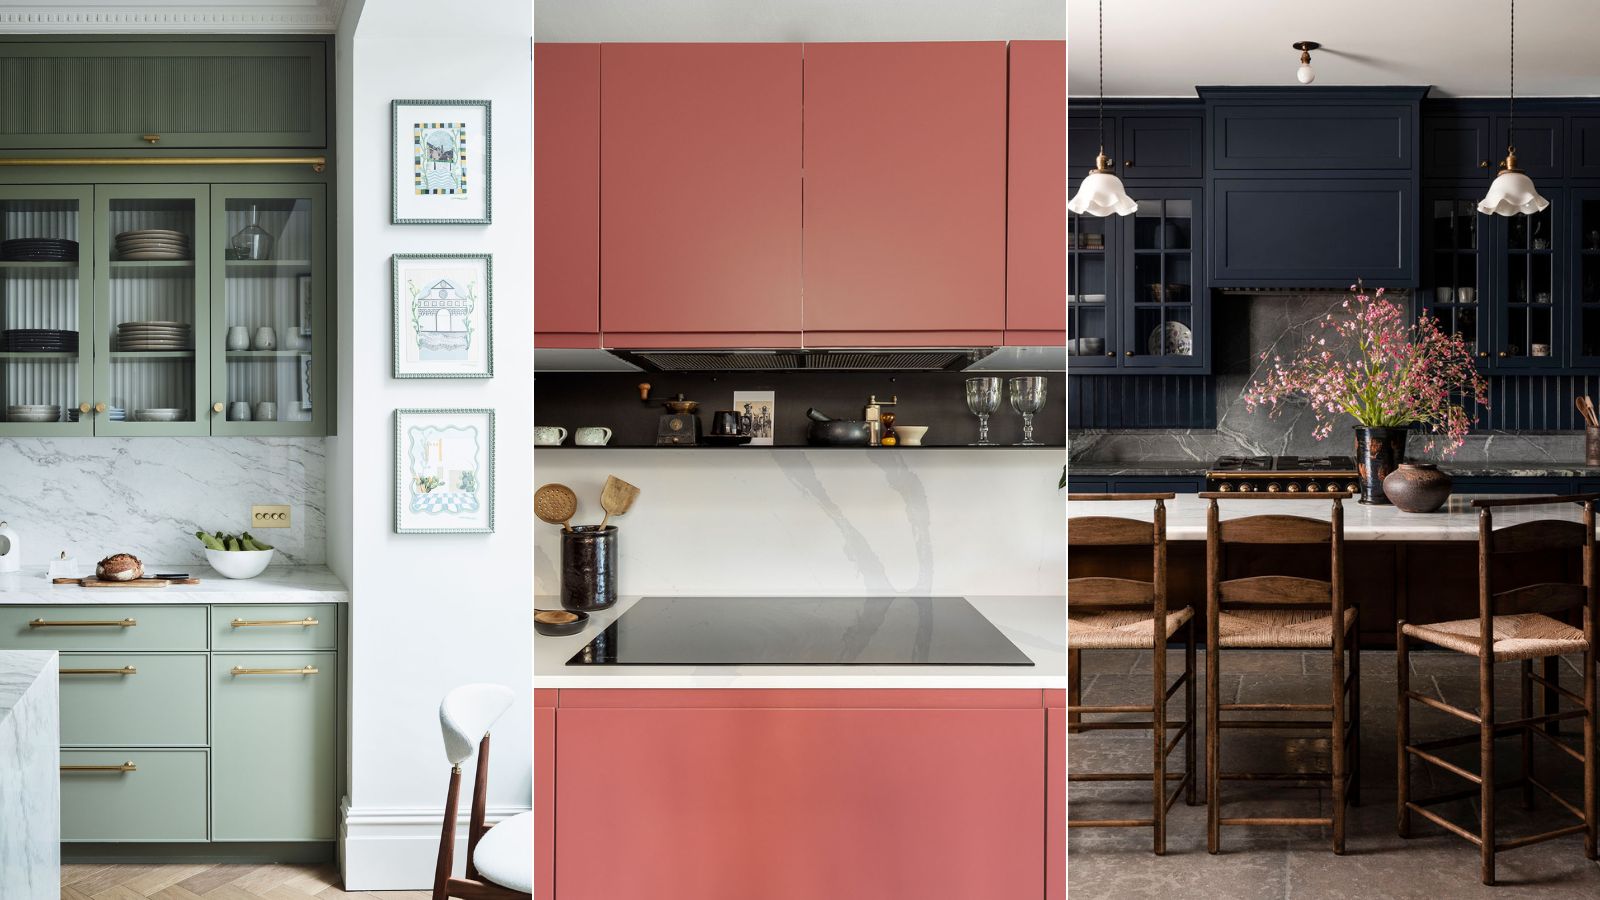 Kitchen color trends – interior designers say these are the only 6 colors we should consider for 2023